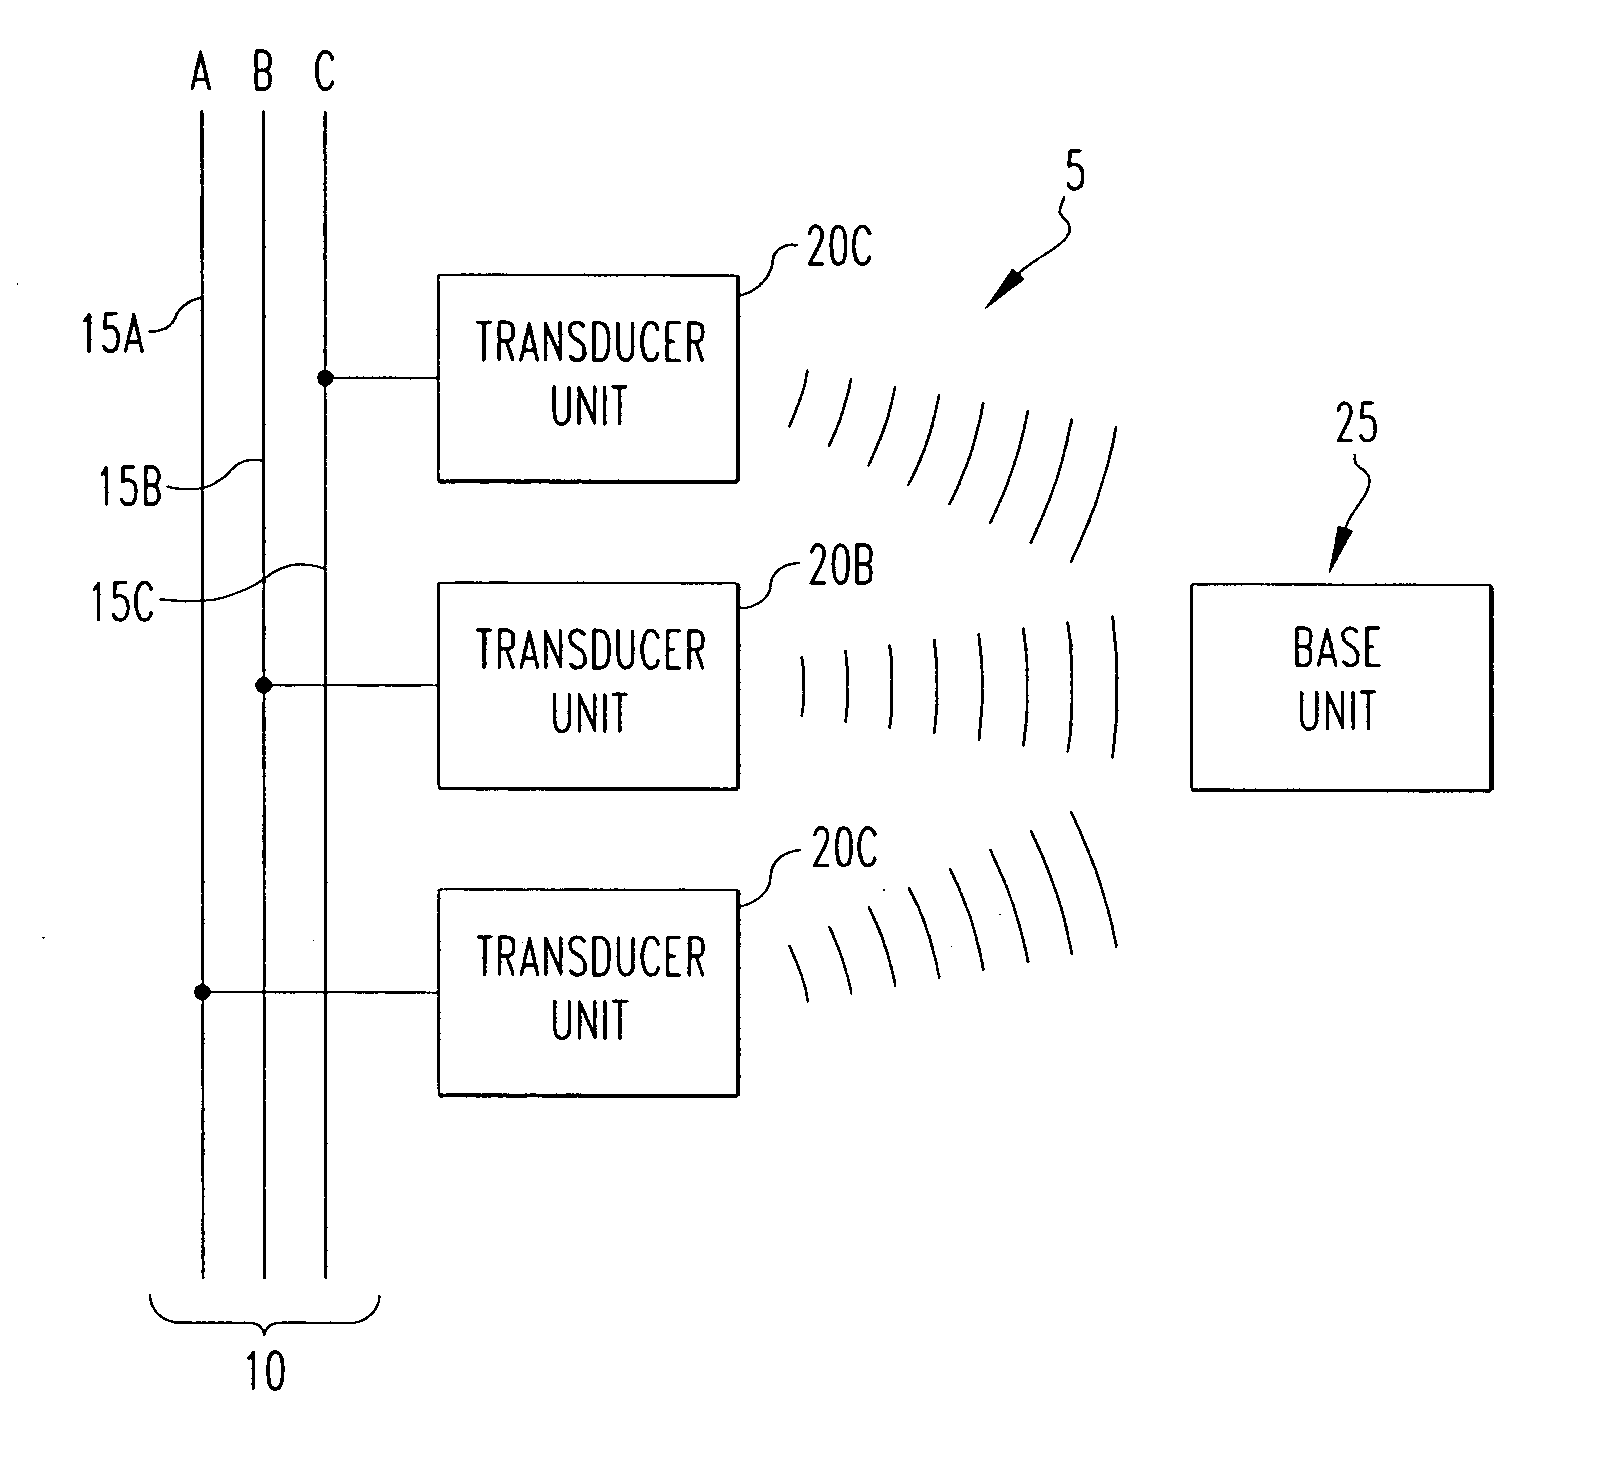 Power monitoring system including a wirelessly communicating electrical power transducer